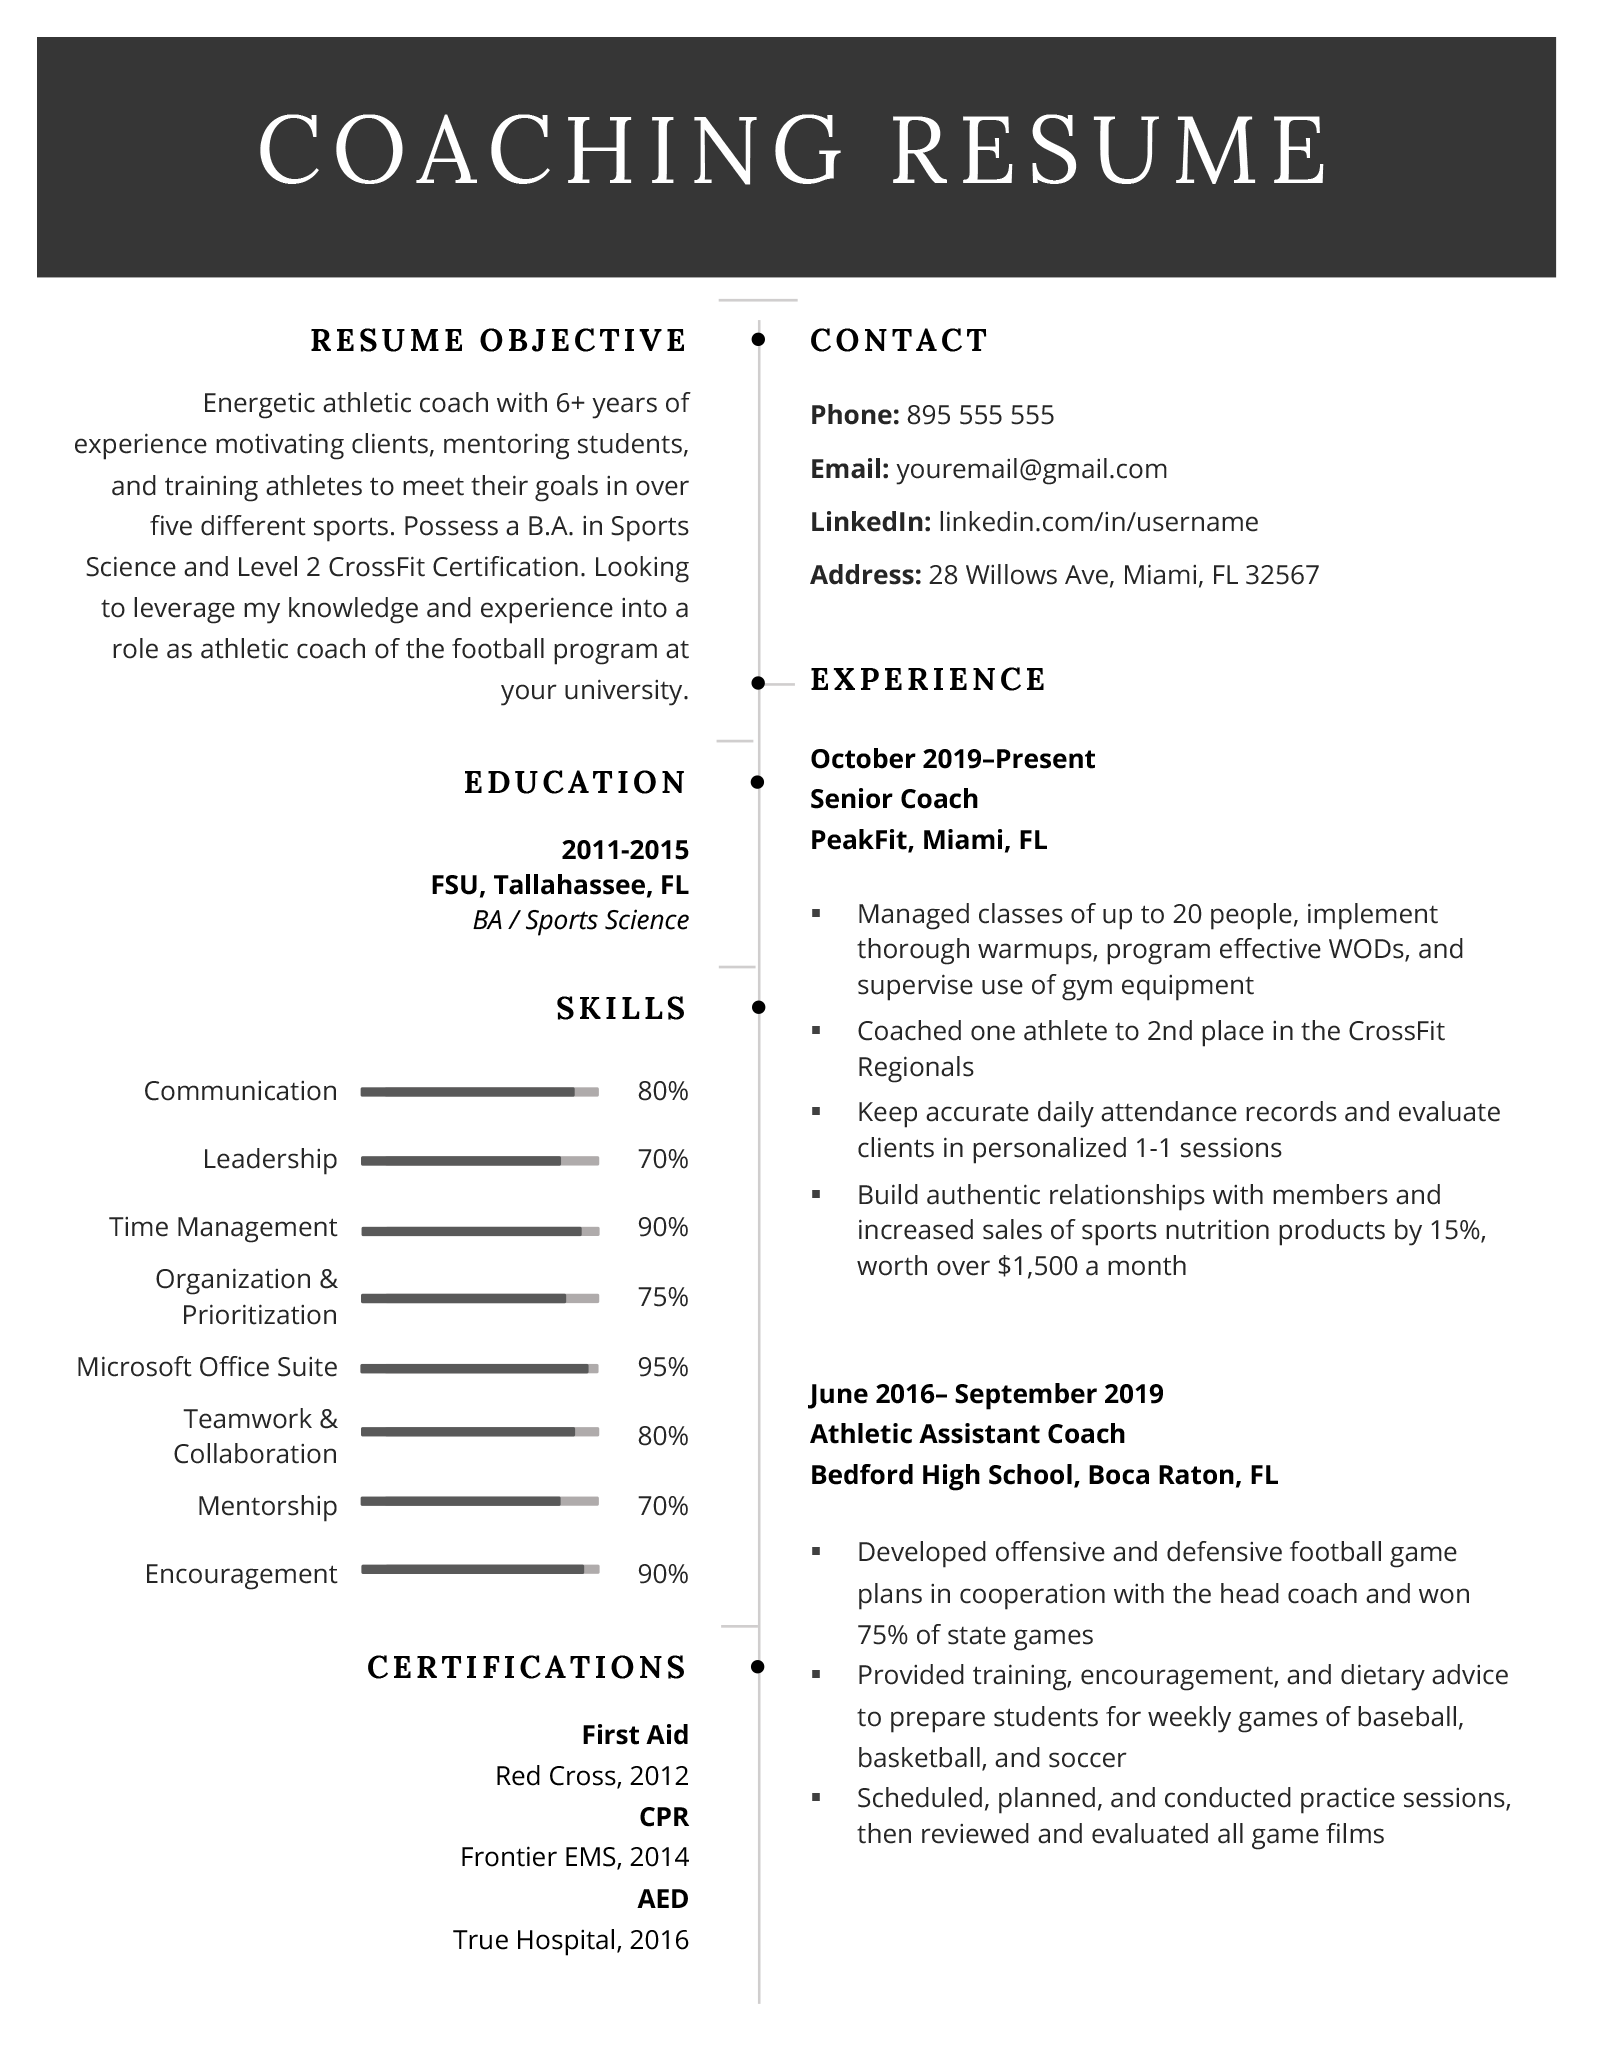 Example of a coaching resume.